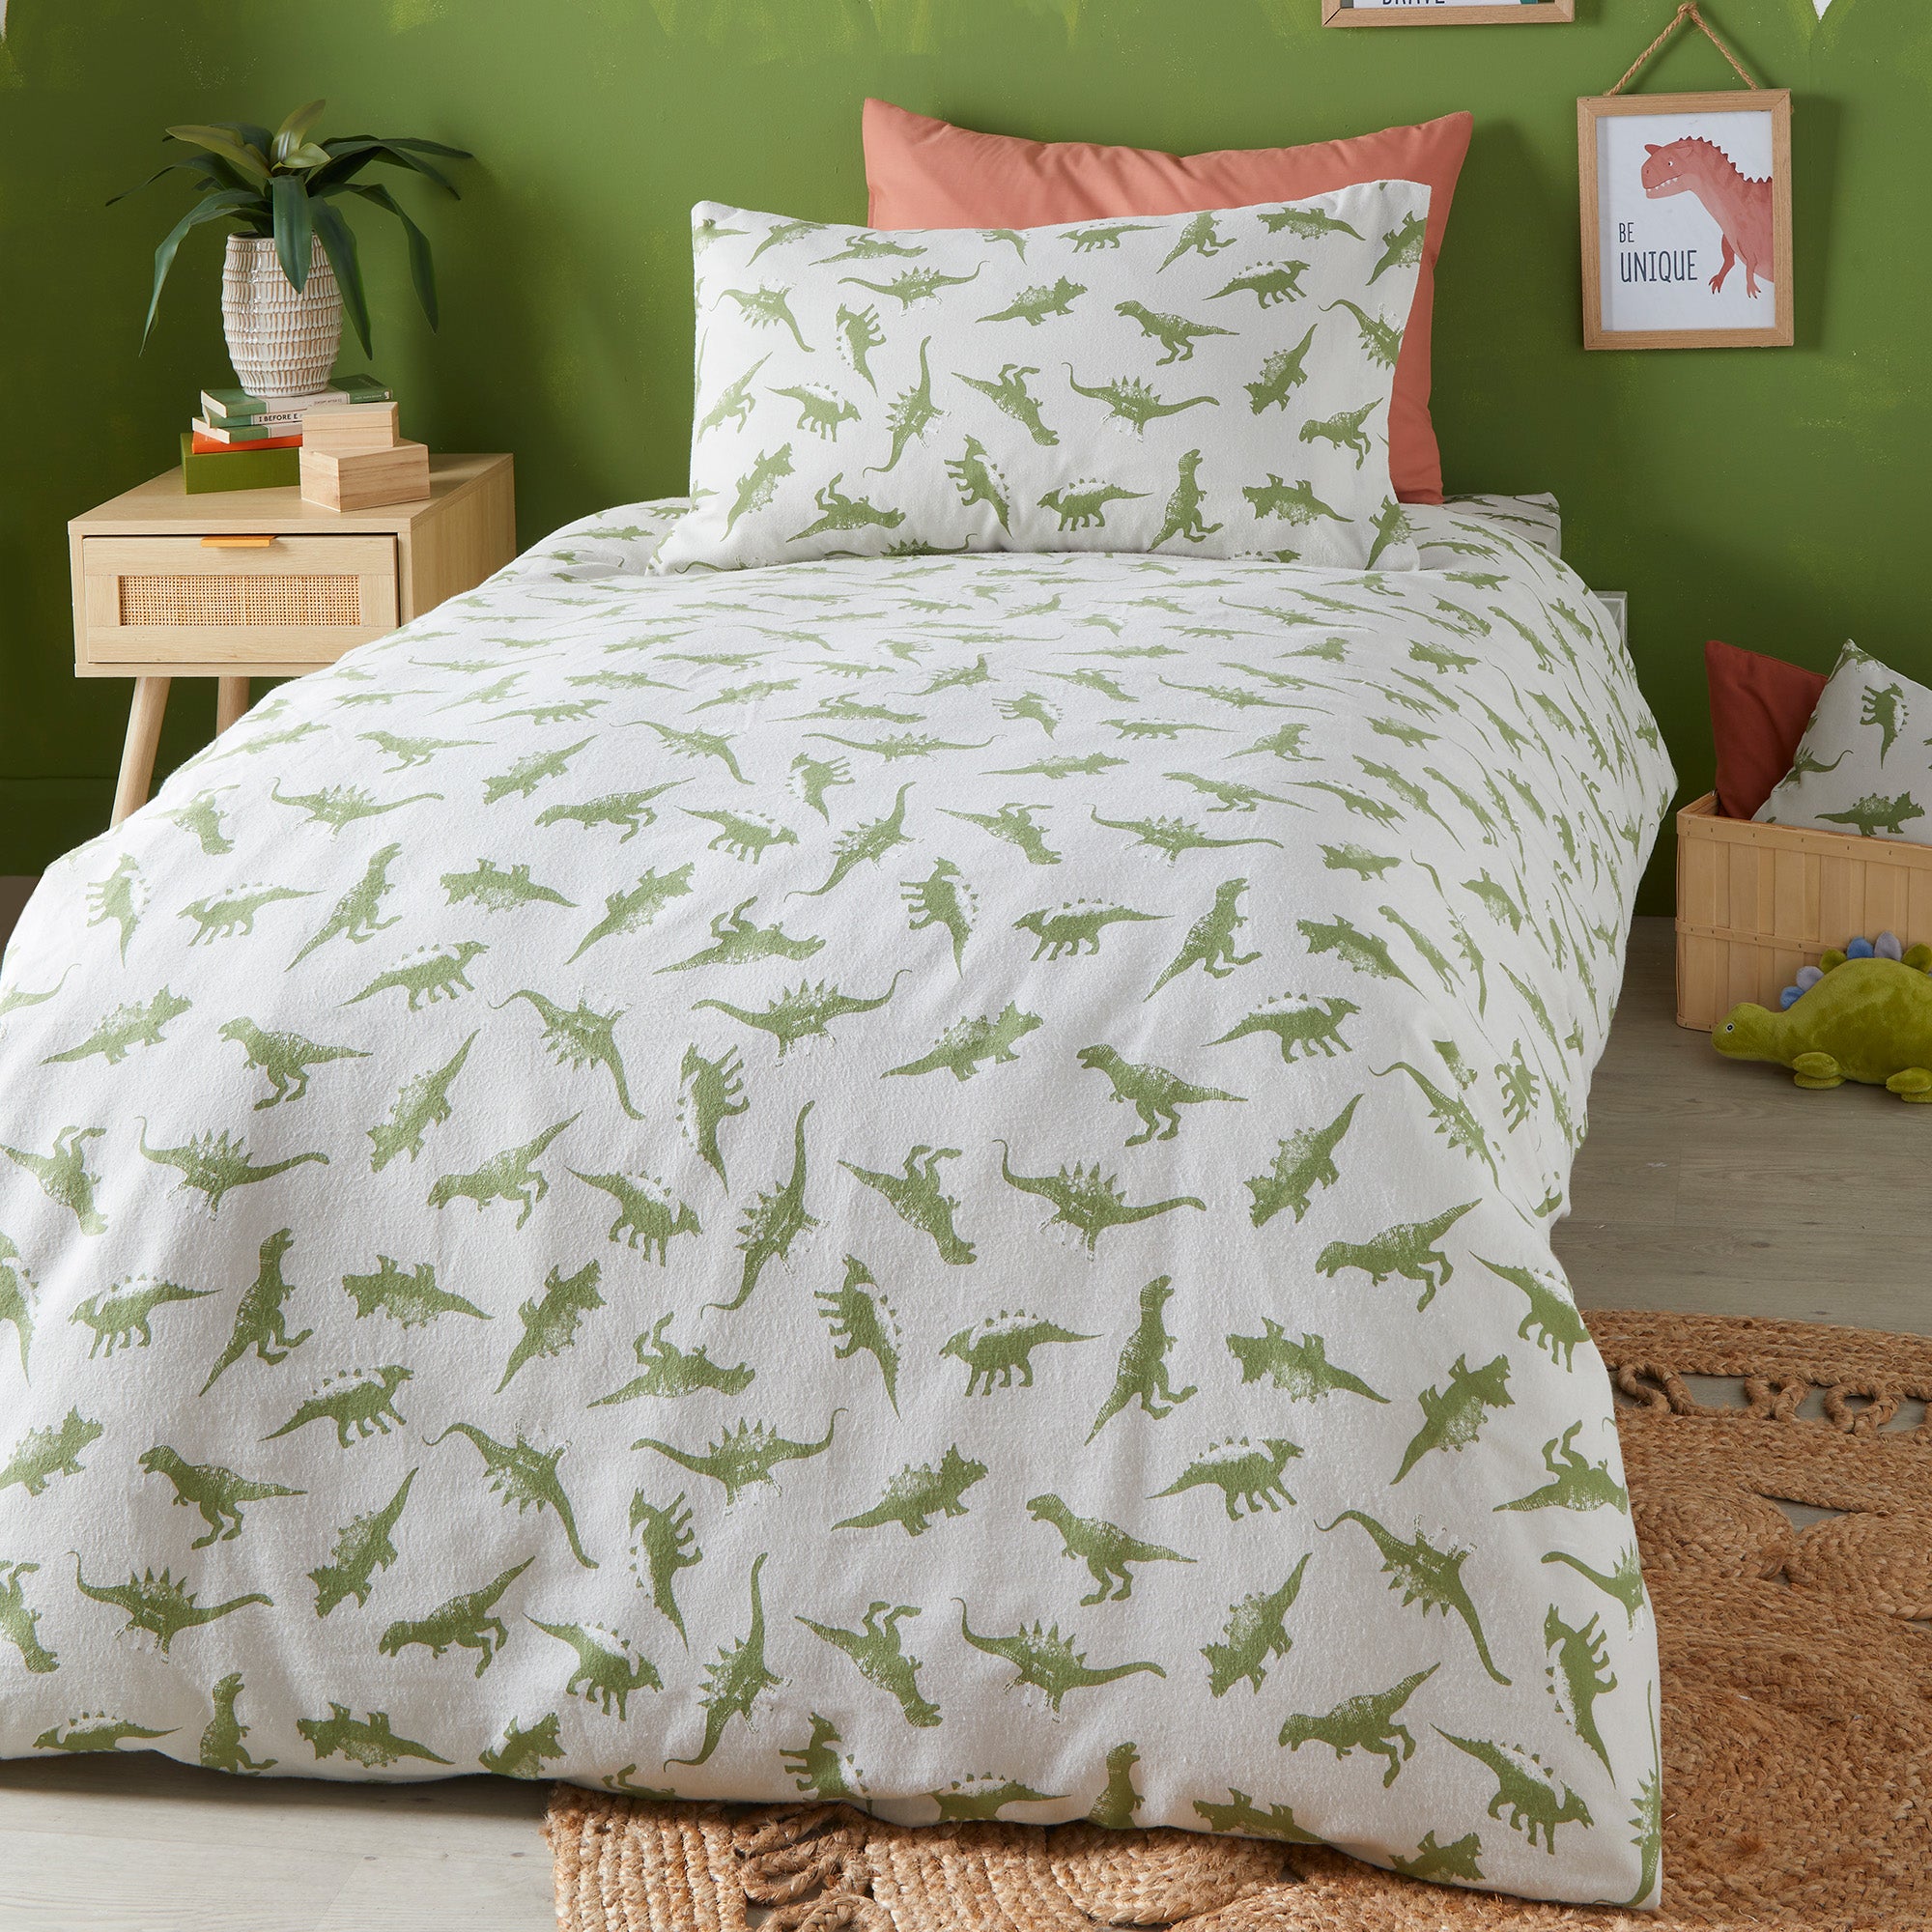 Duvet Cover Set Dino by Bedlam in Green